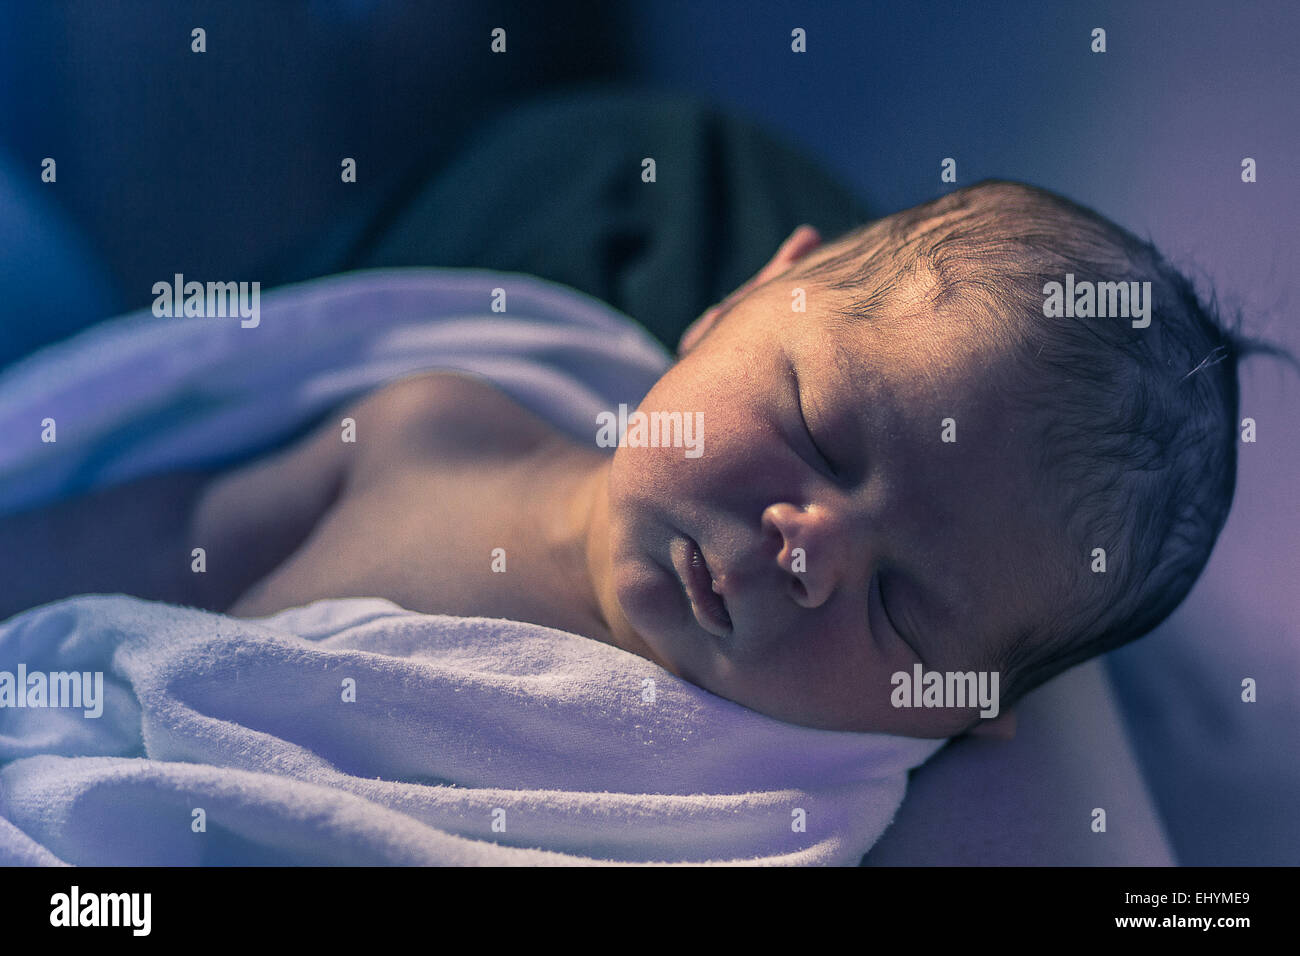 New Born Baby sleeping Banque D'Images